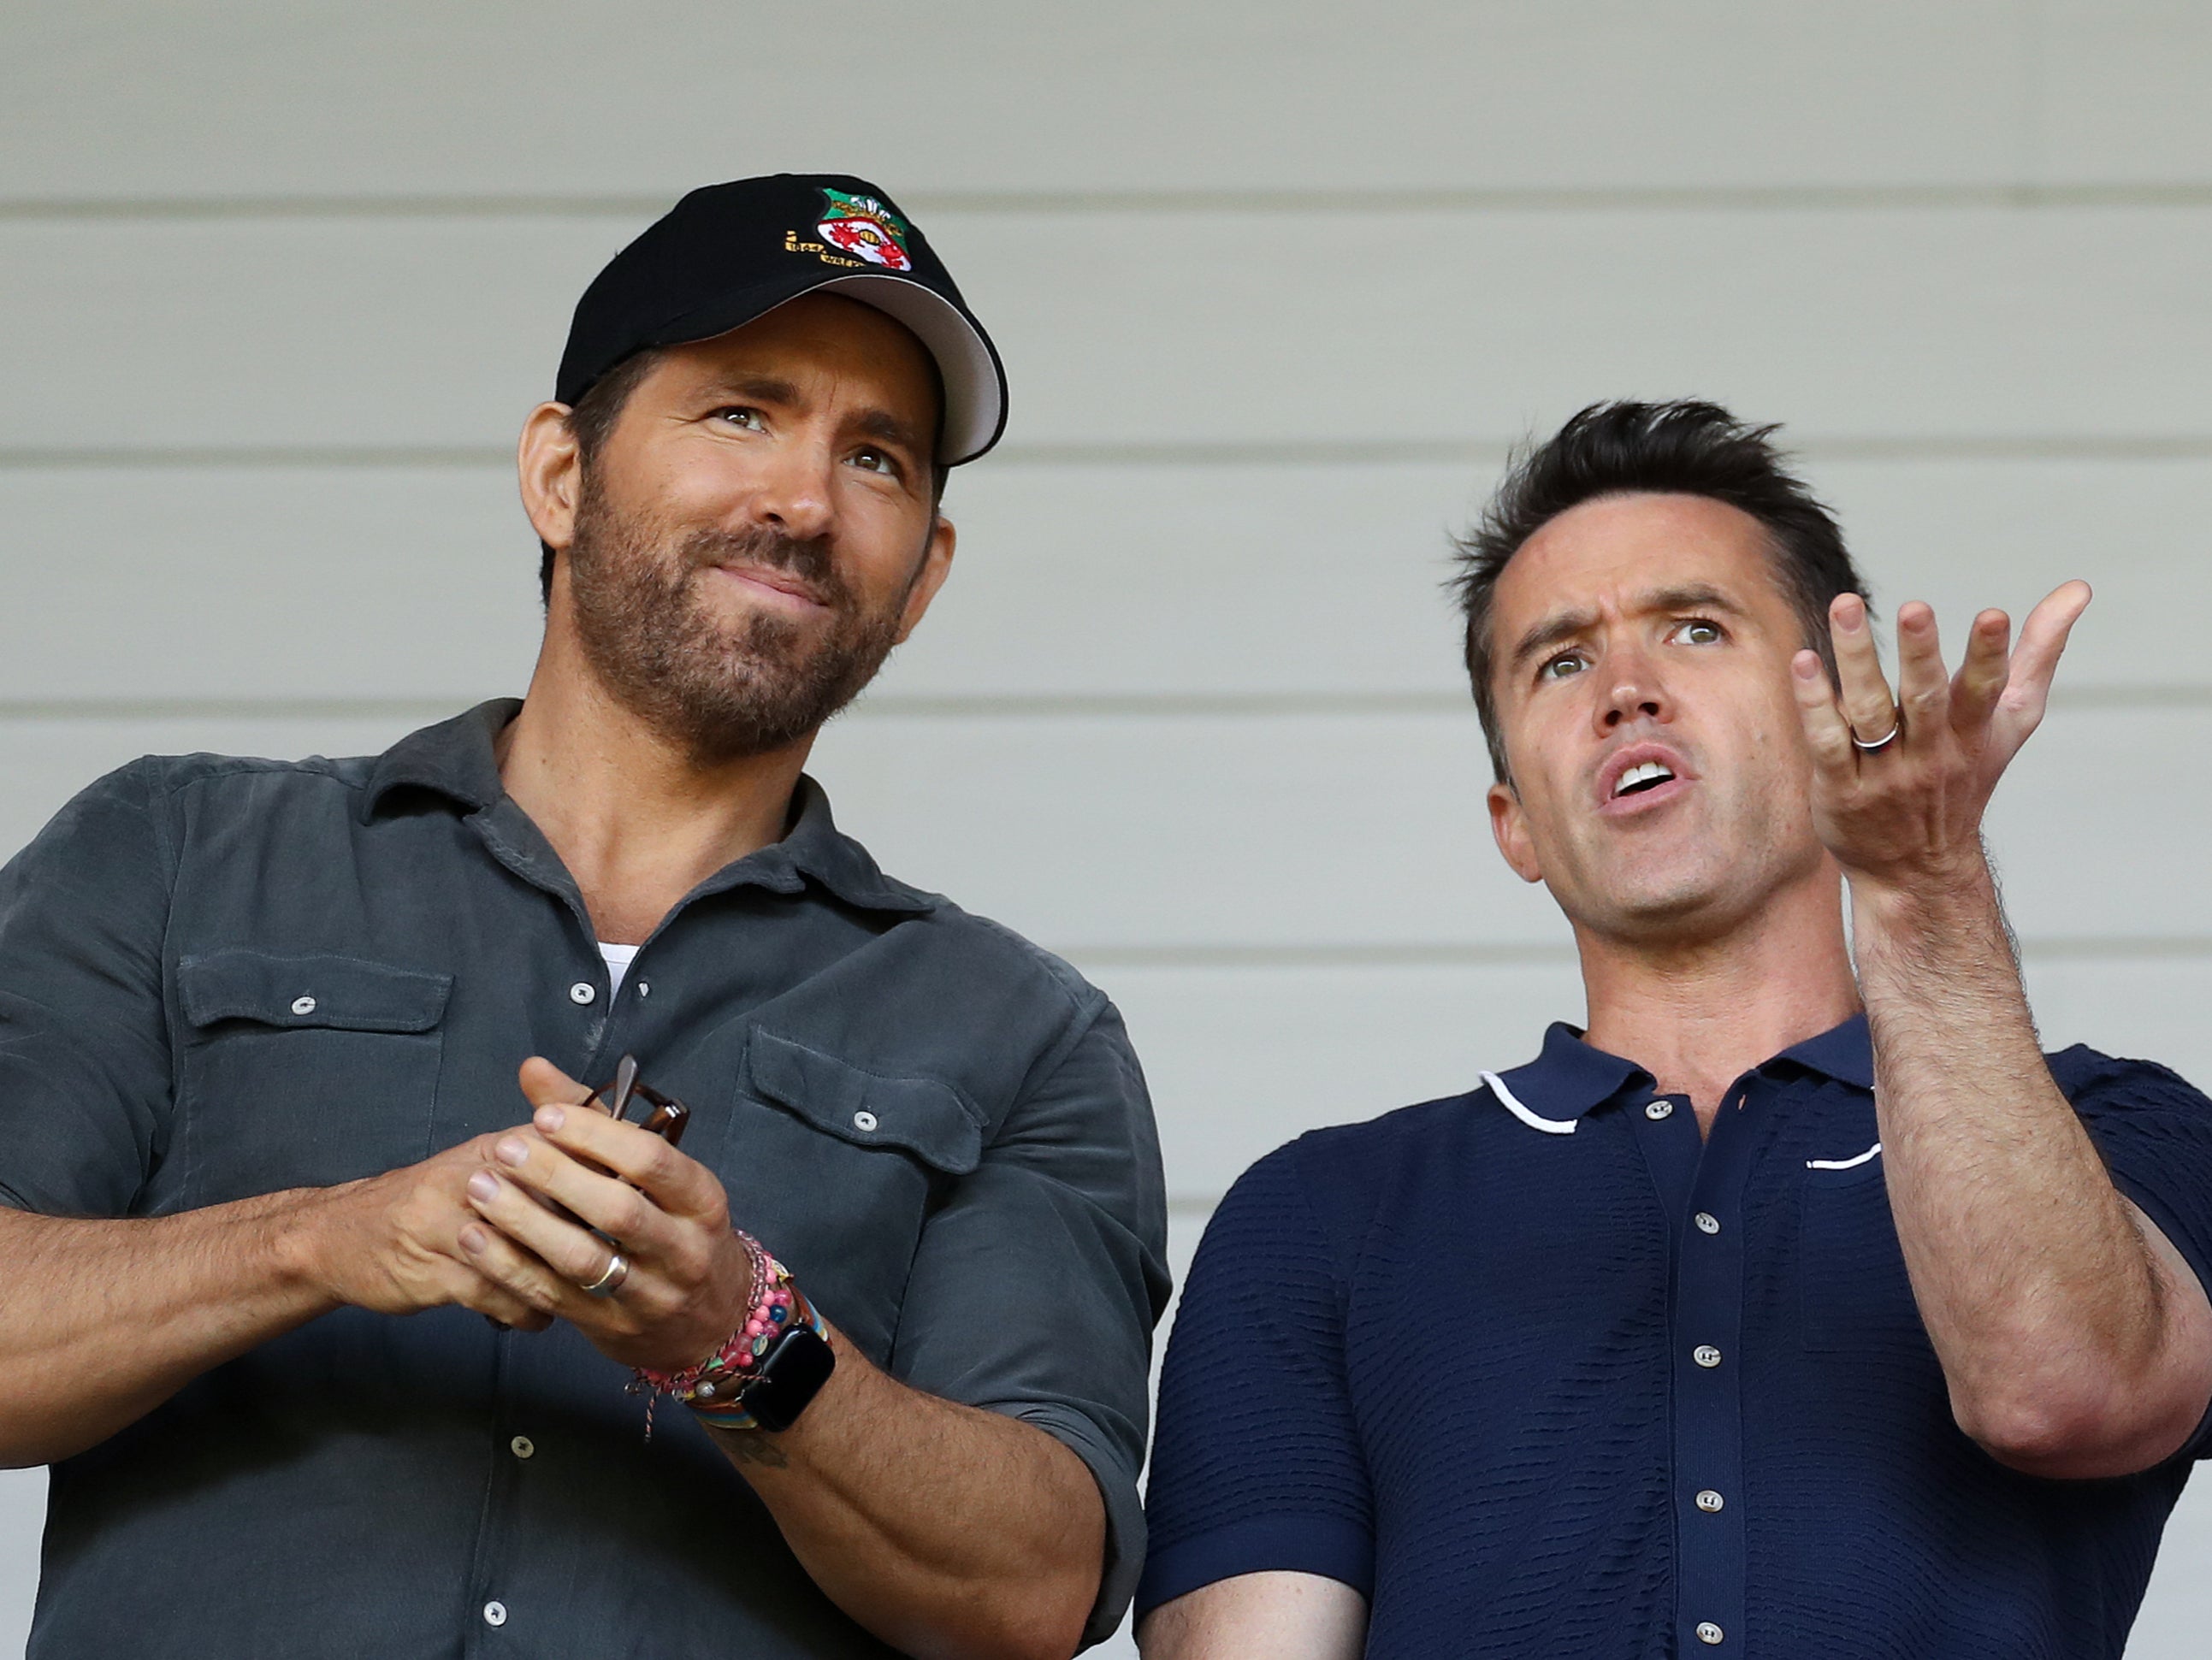 Reynolds and McElhenney at a Wrexham game together